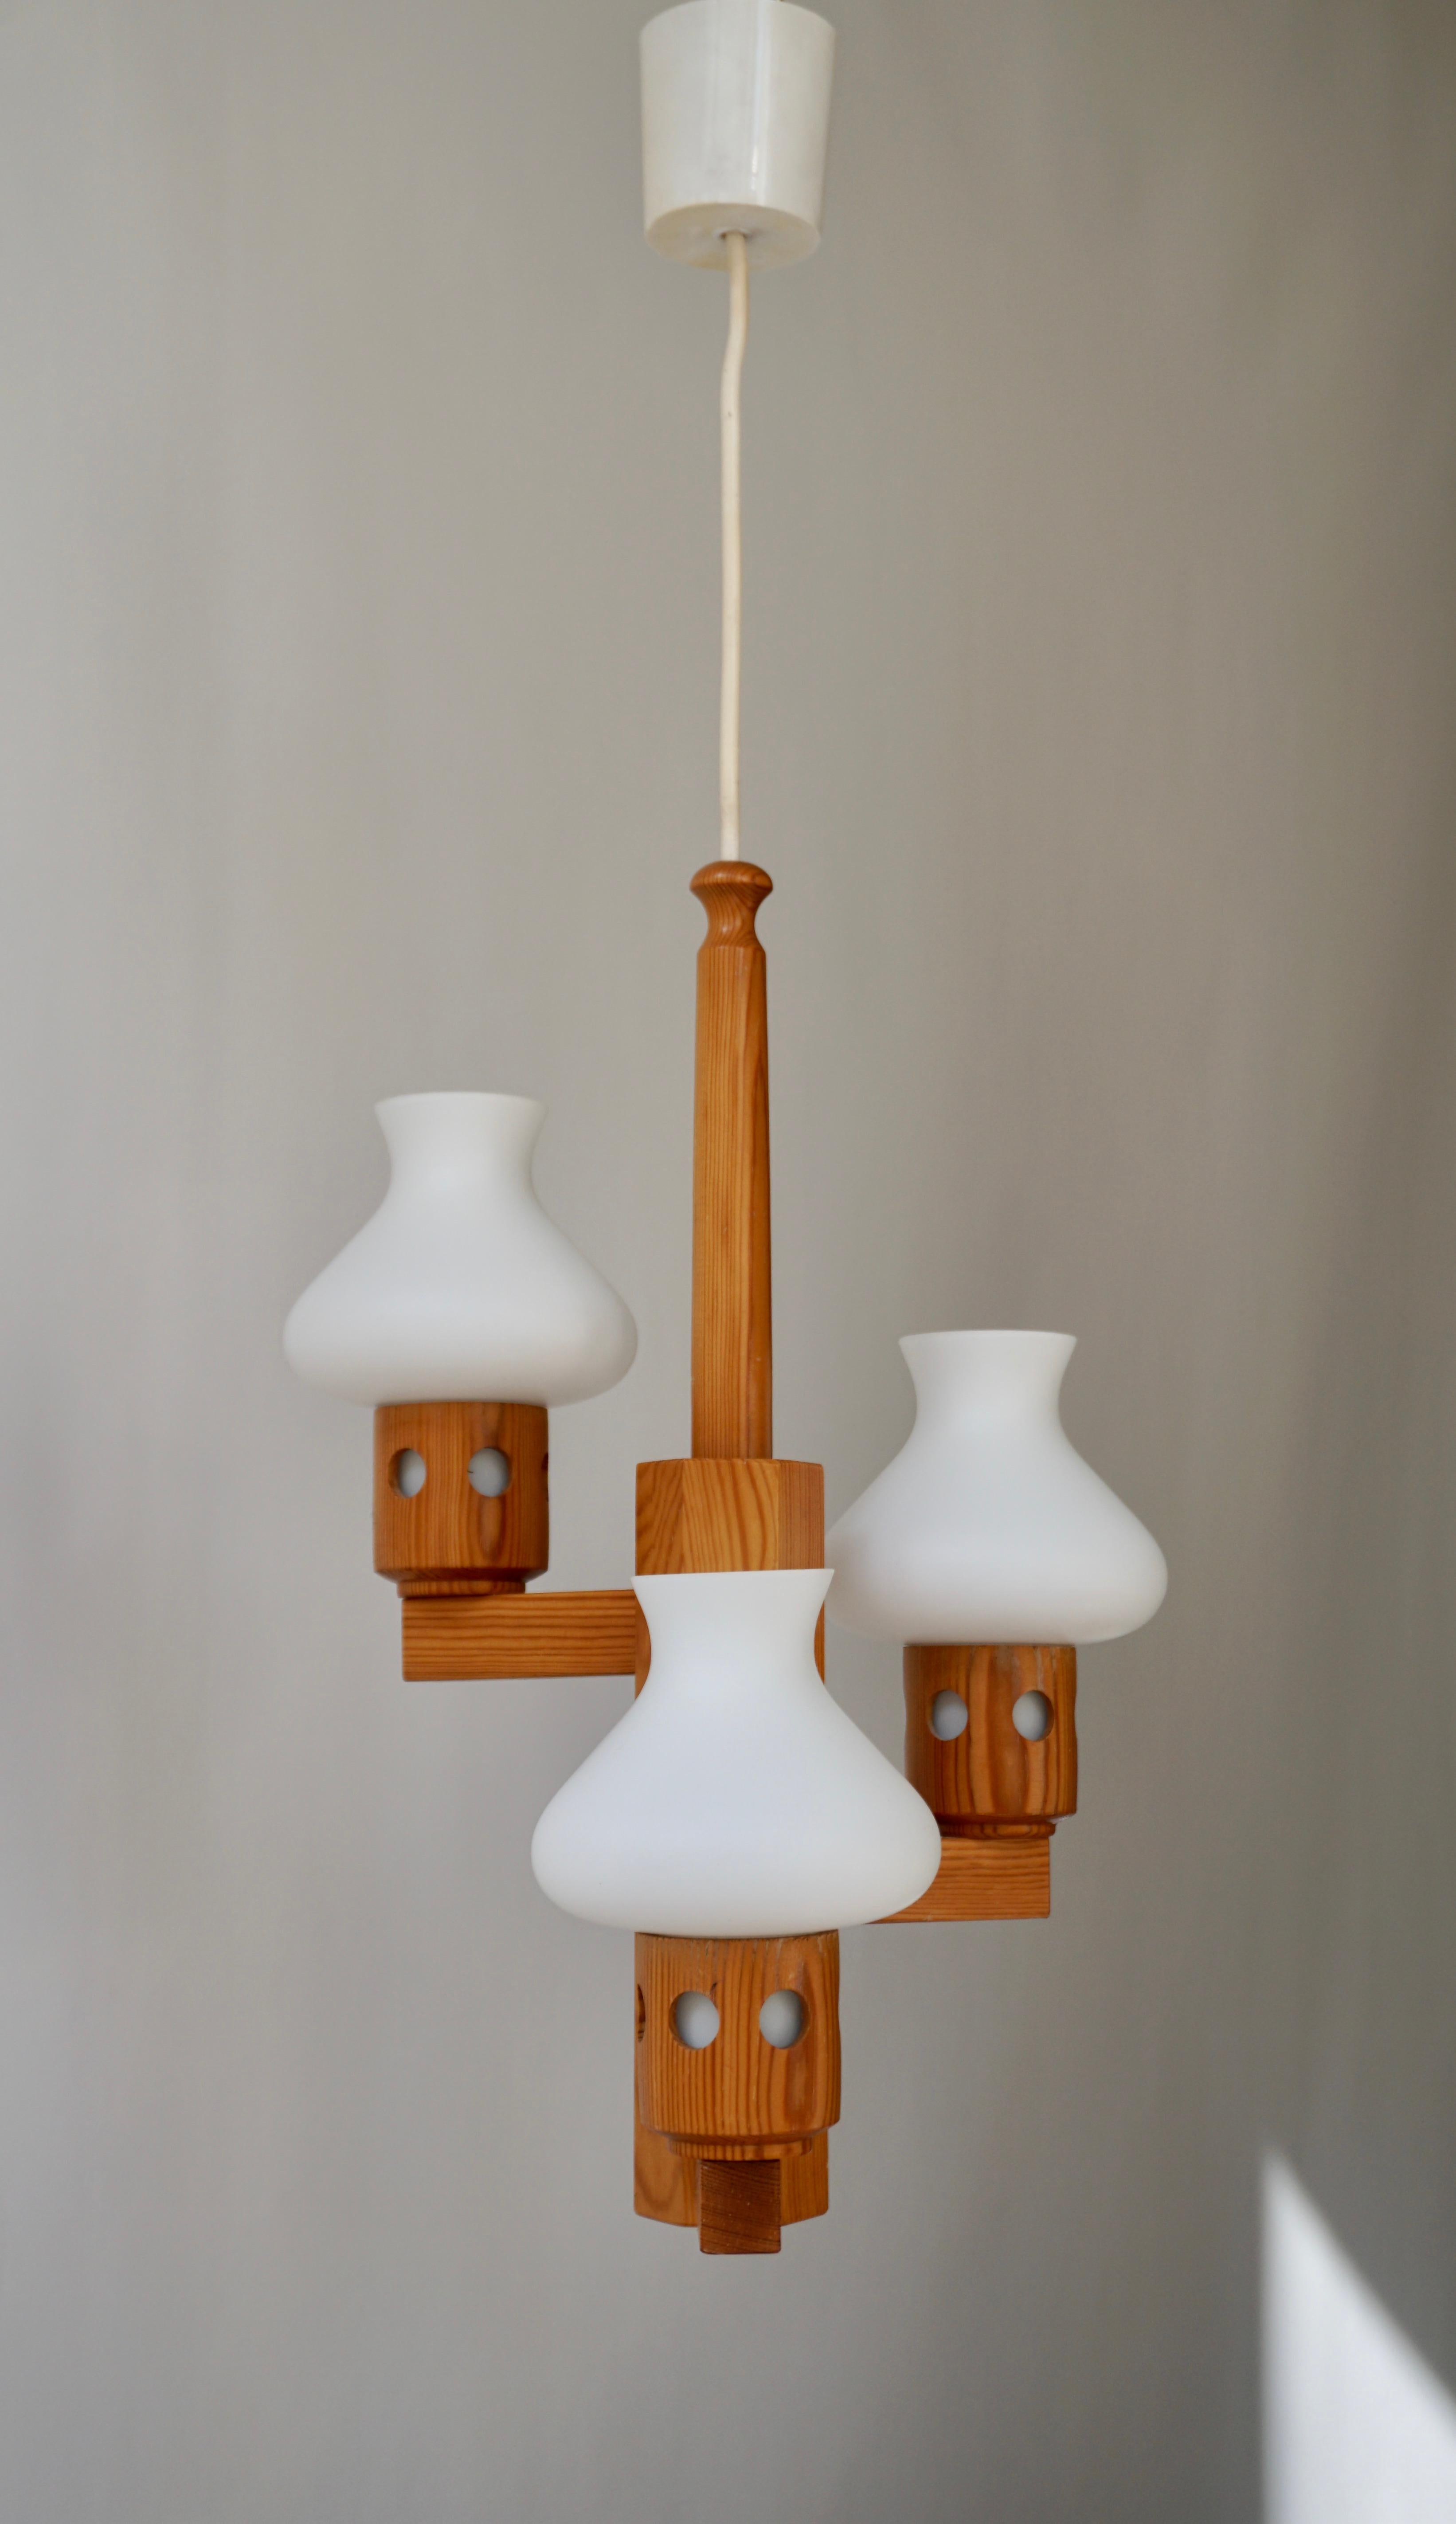 Chandelier, pine wood and opaline white glass, Sweden, 1950s -1960s - 1970s. 

This large sculptural wooden chandelier with three white spheres create a warm and soft environment. The wood is solid and the shades reflects the light perfect which